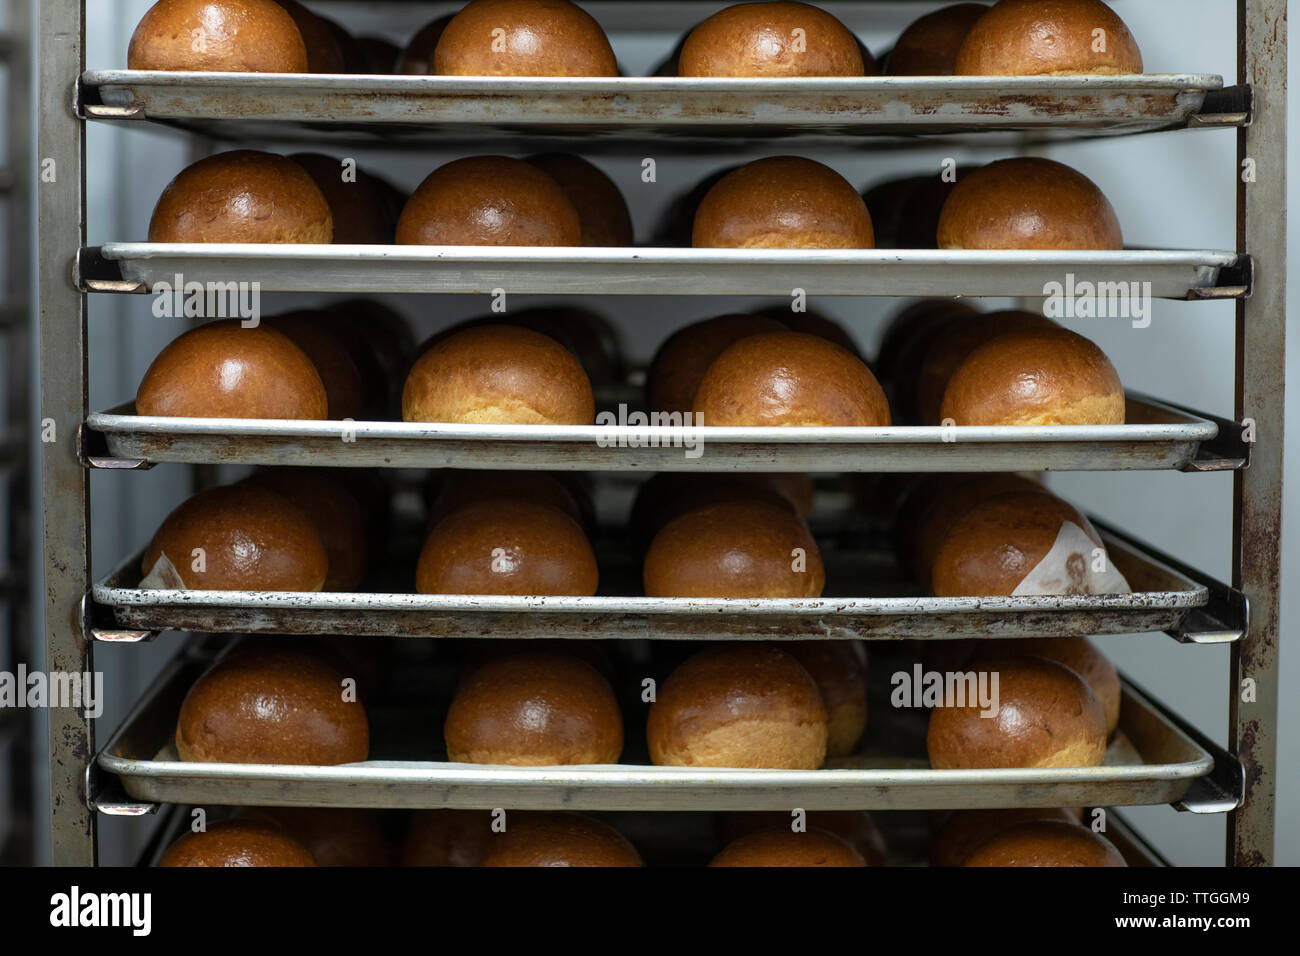 Freshly baked rolls sit on a rack after coming out of the oven Stock Photo